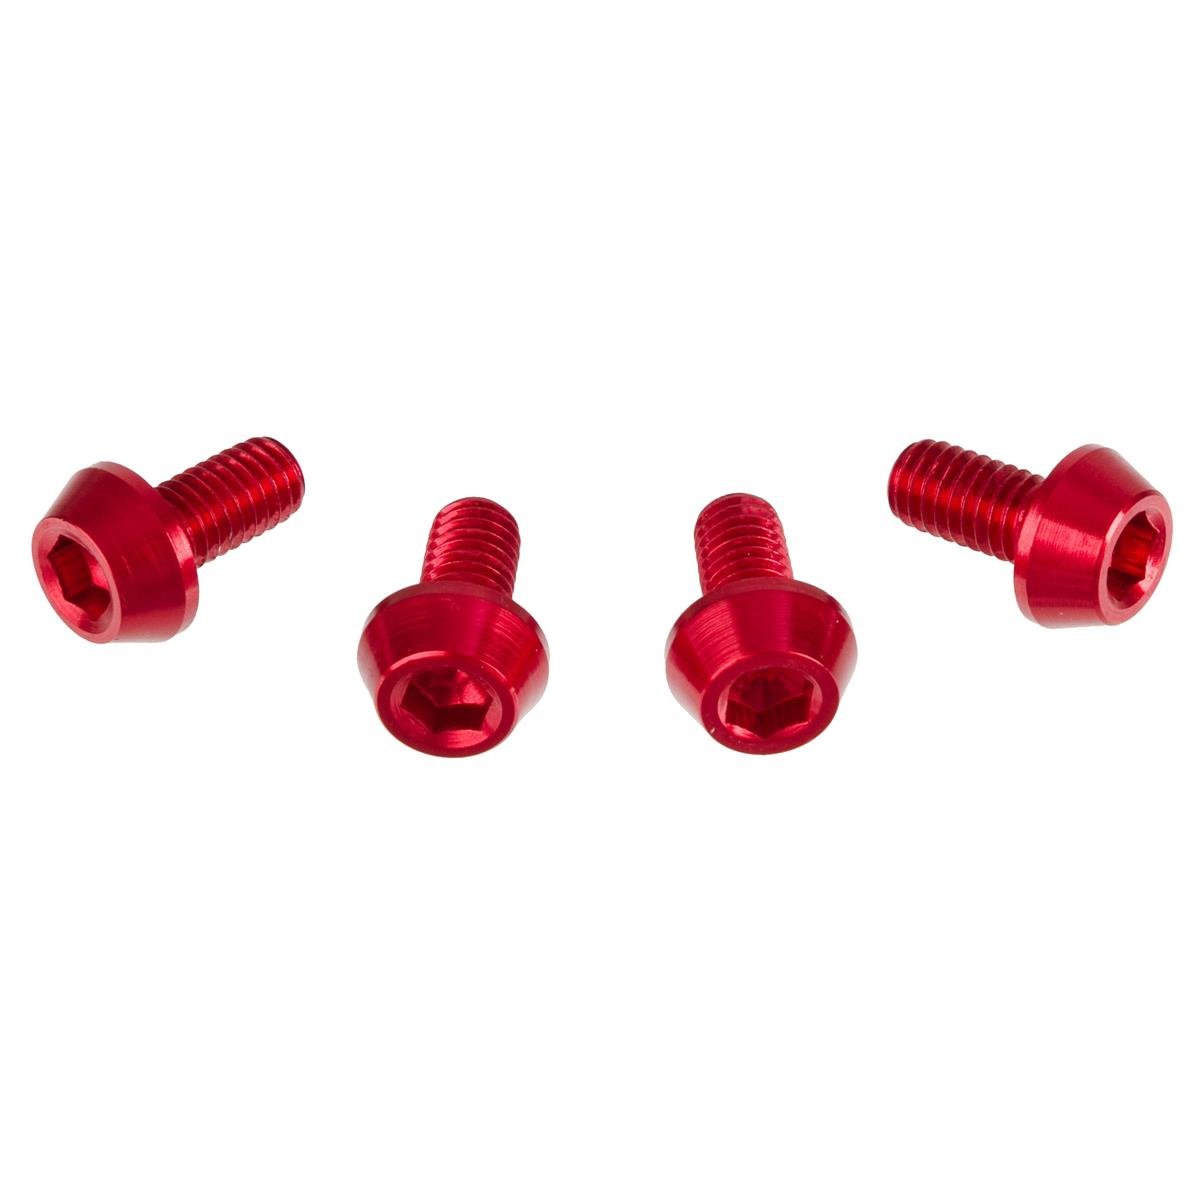 DRC Inner Hex Bolts  M6 x 12 mm, Red, Pack of 4